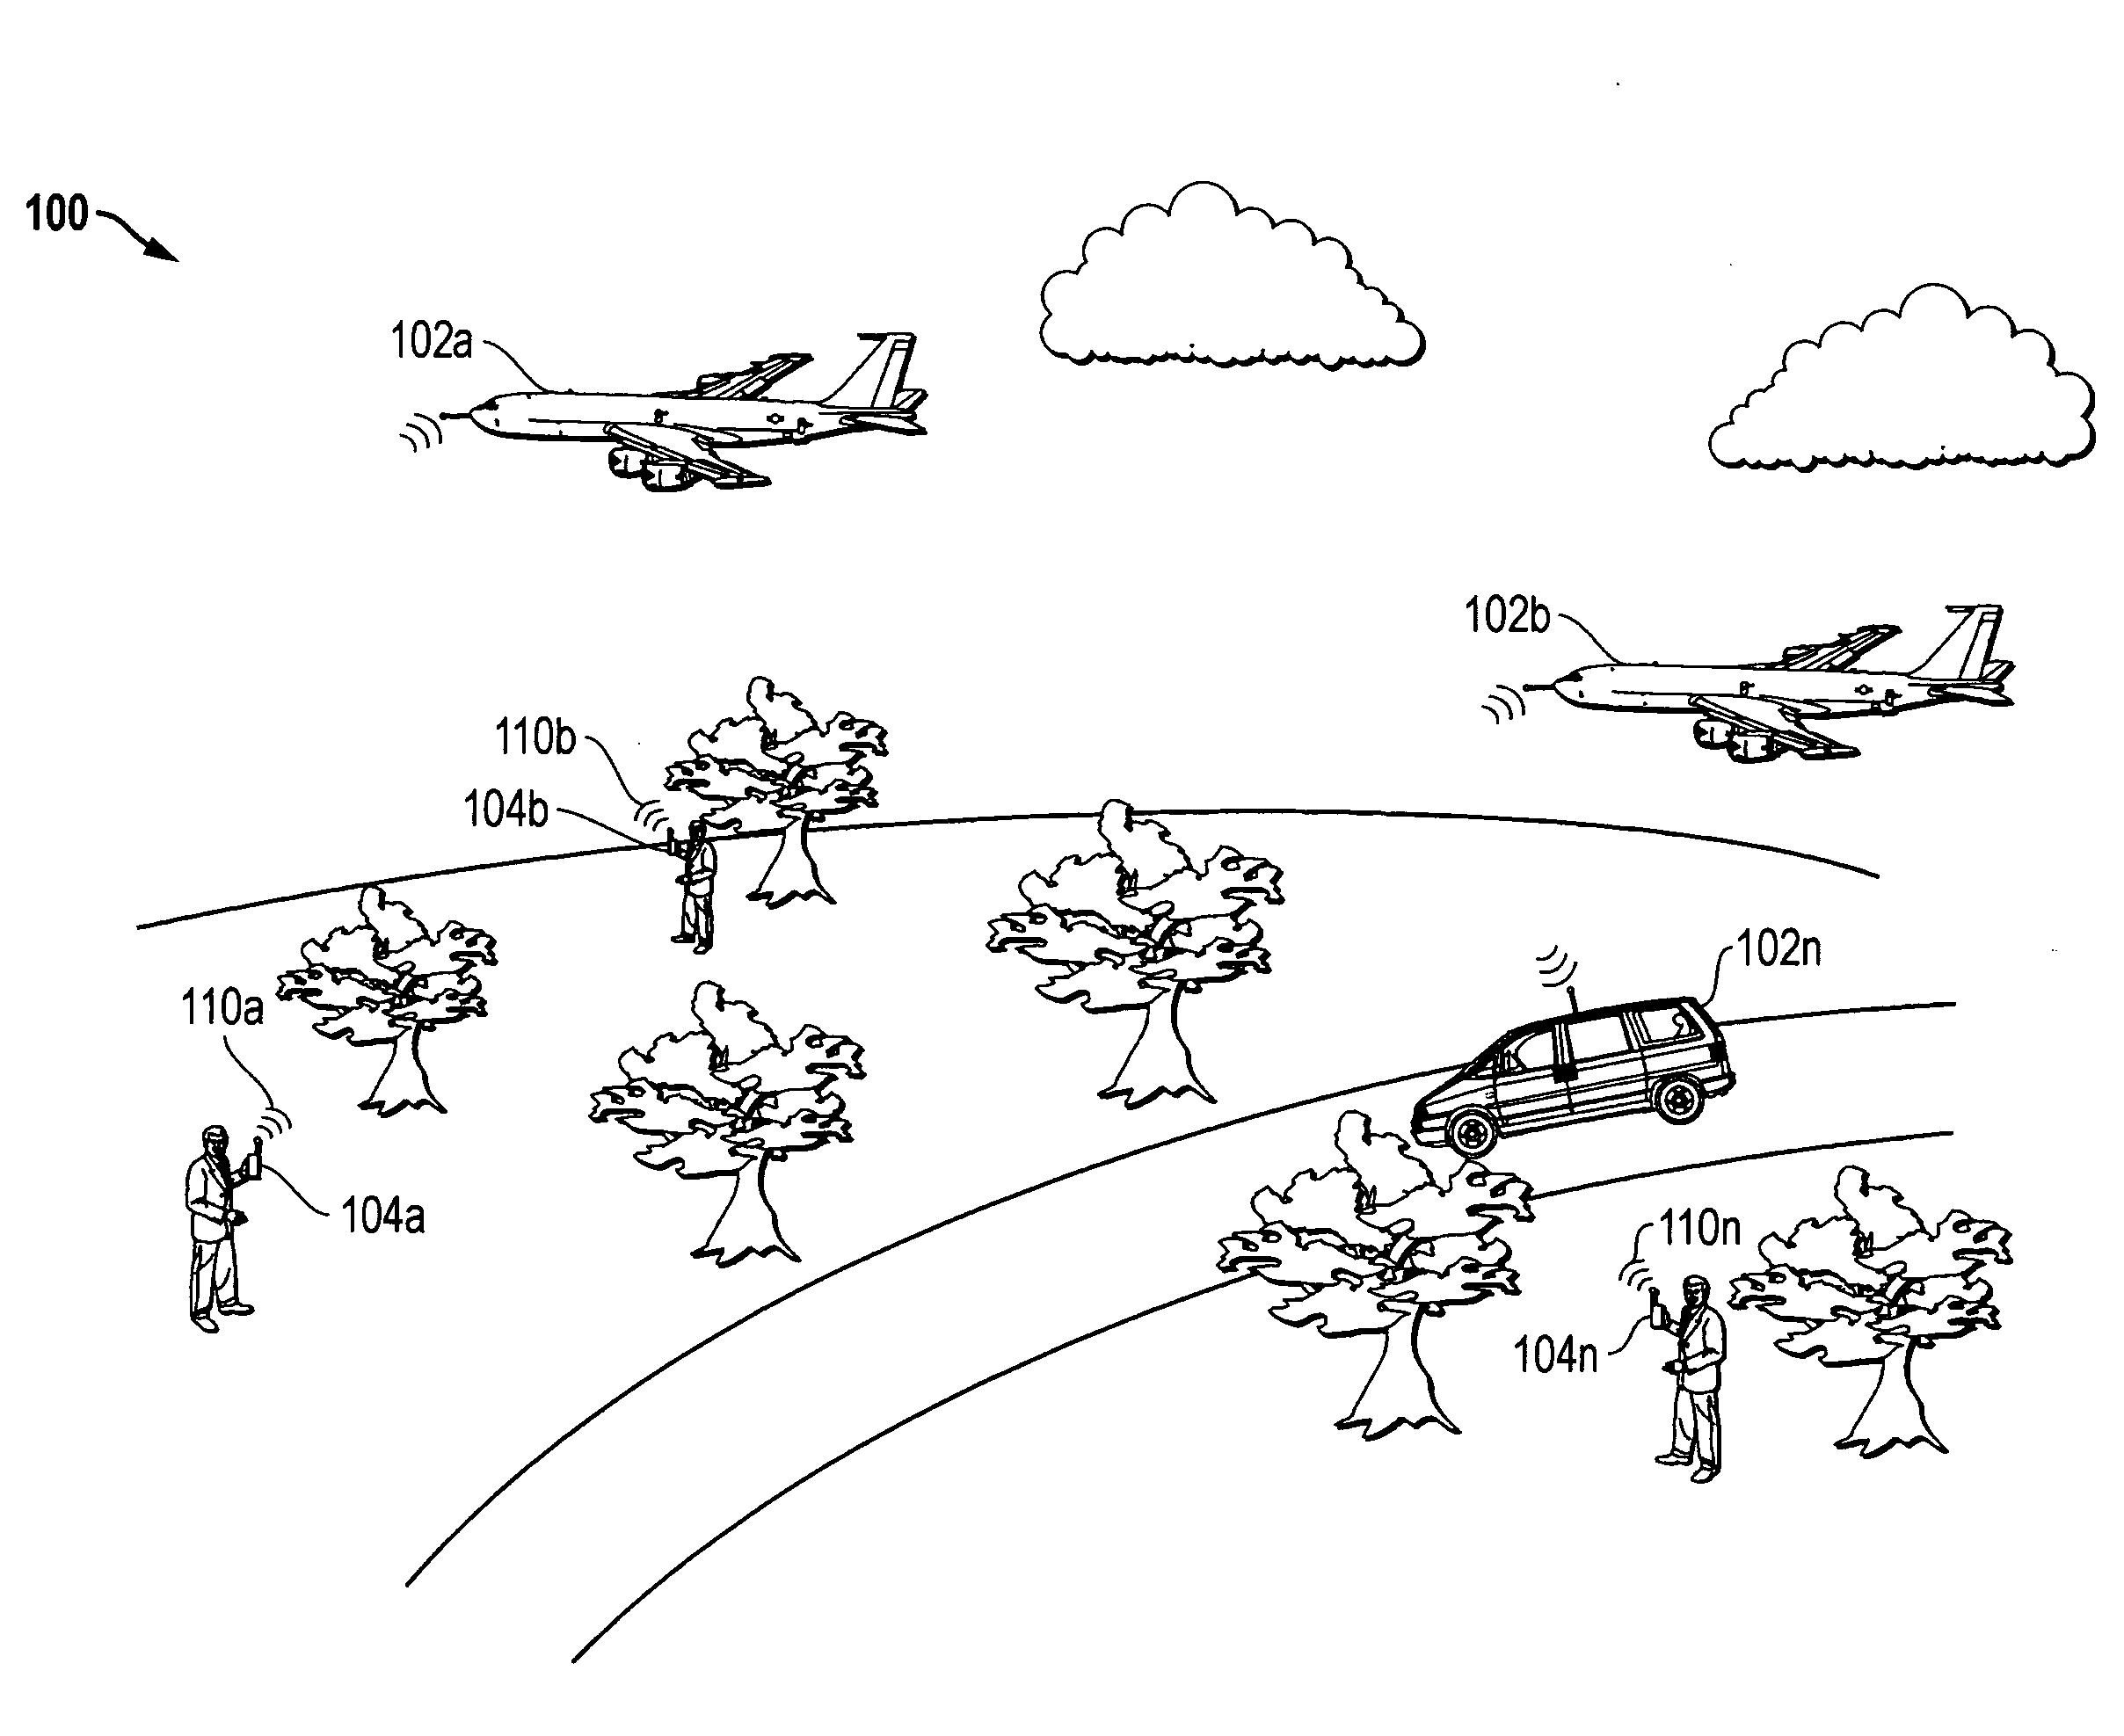 Methods and systems for detection and location of multiple emitters